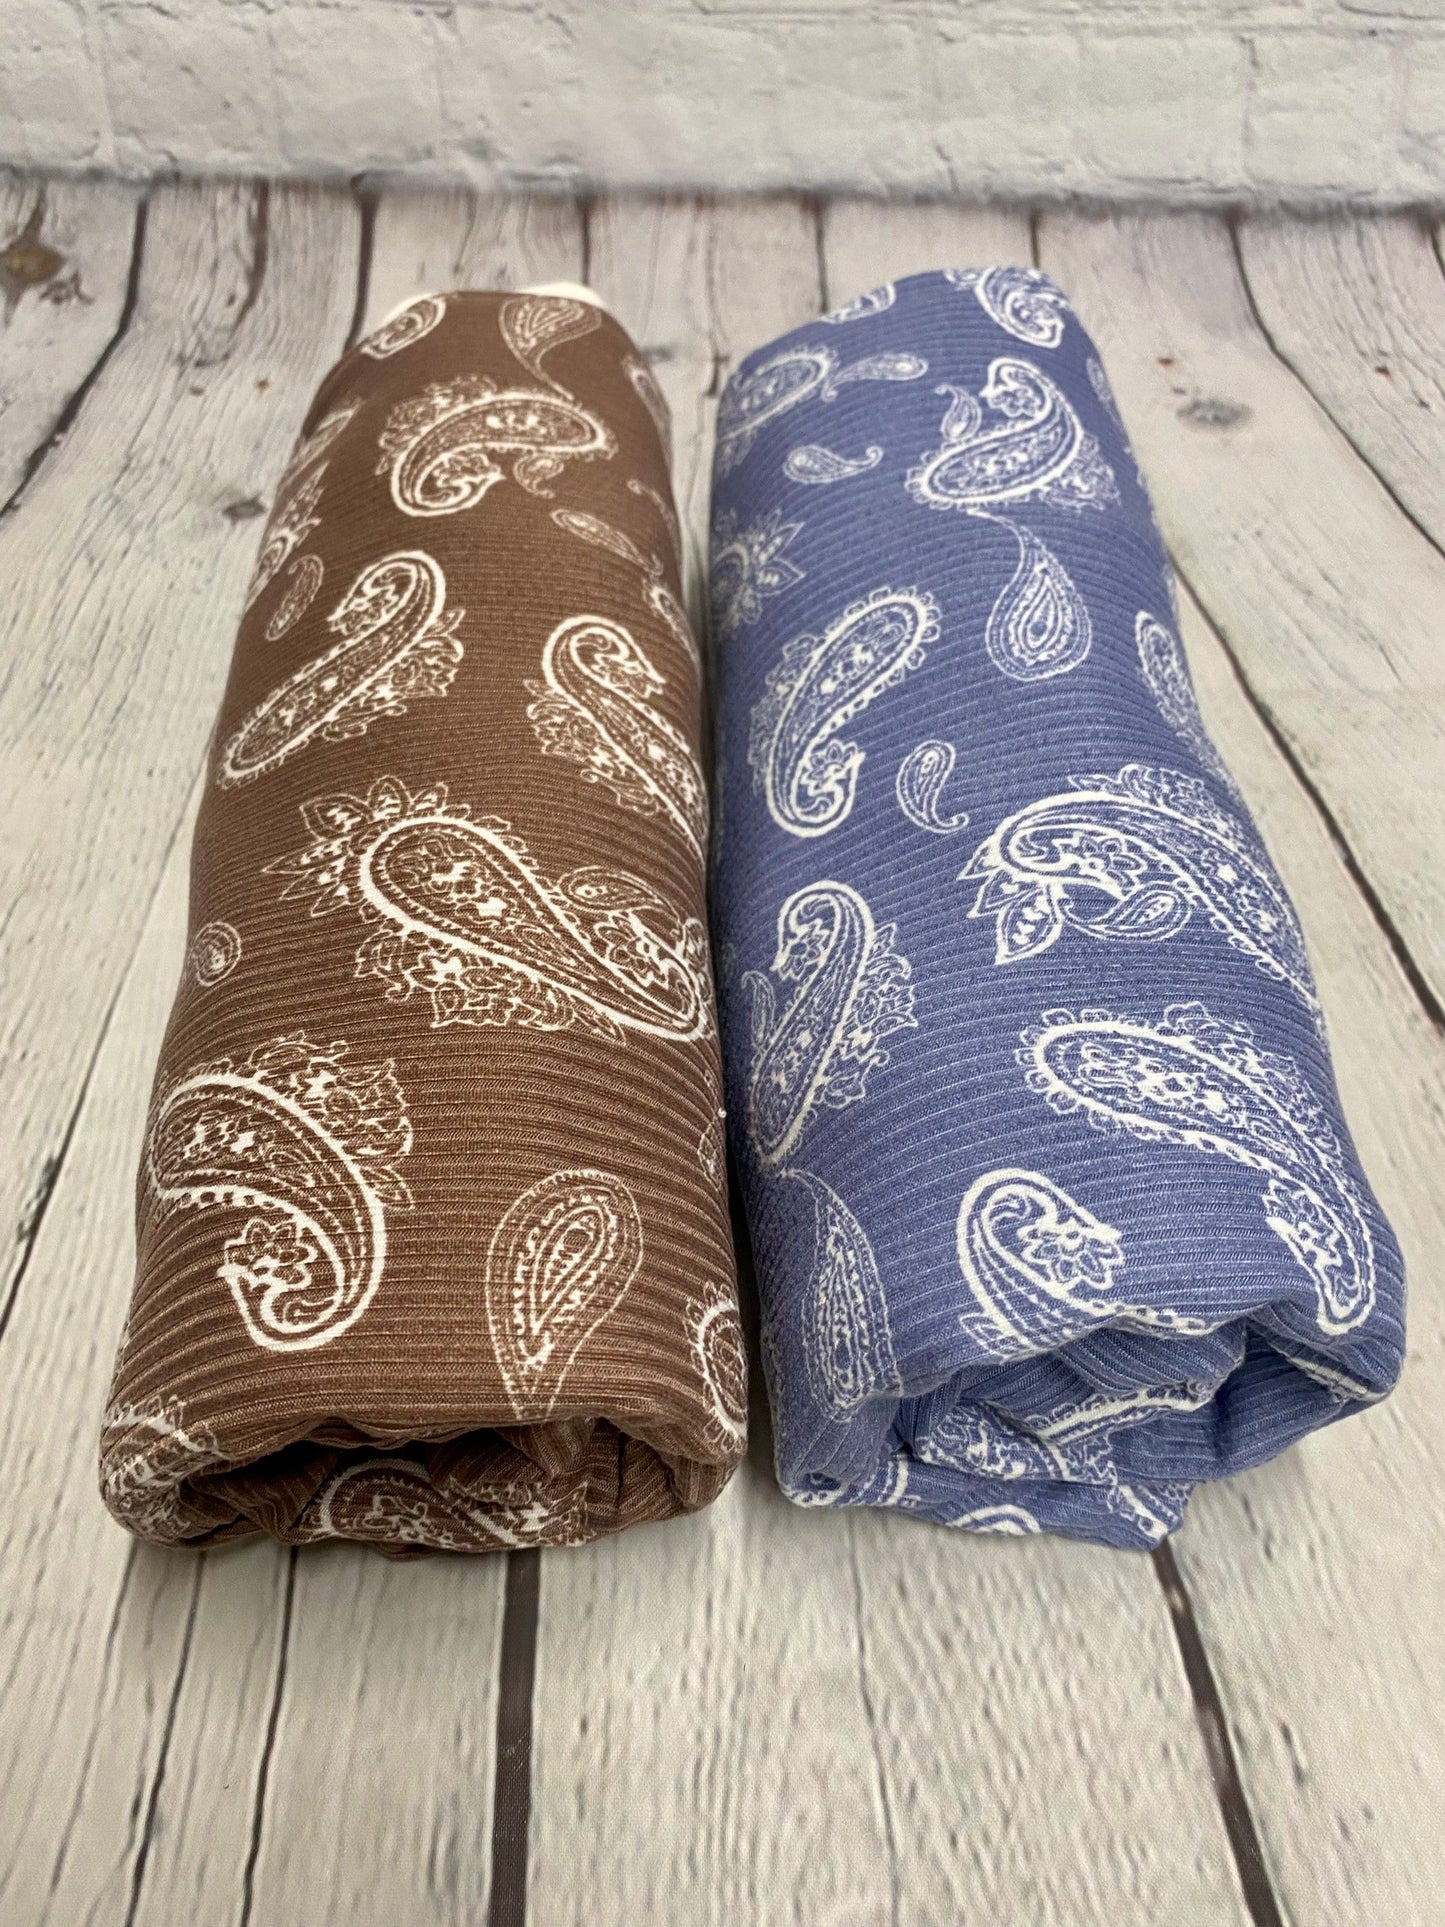 DBP 4x2 Rib Knit Small Flower Double Brushed Polyester Spandex Bandana Paisley Print By The Yard